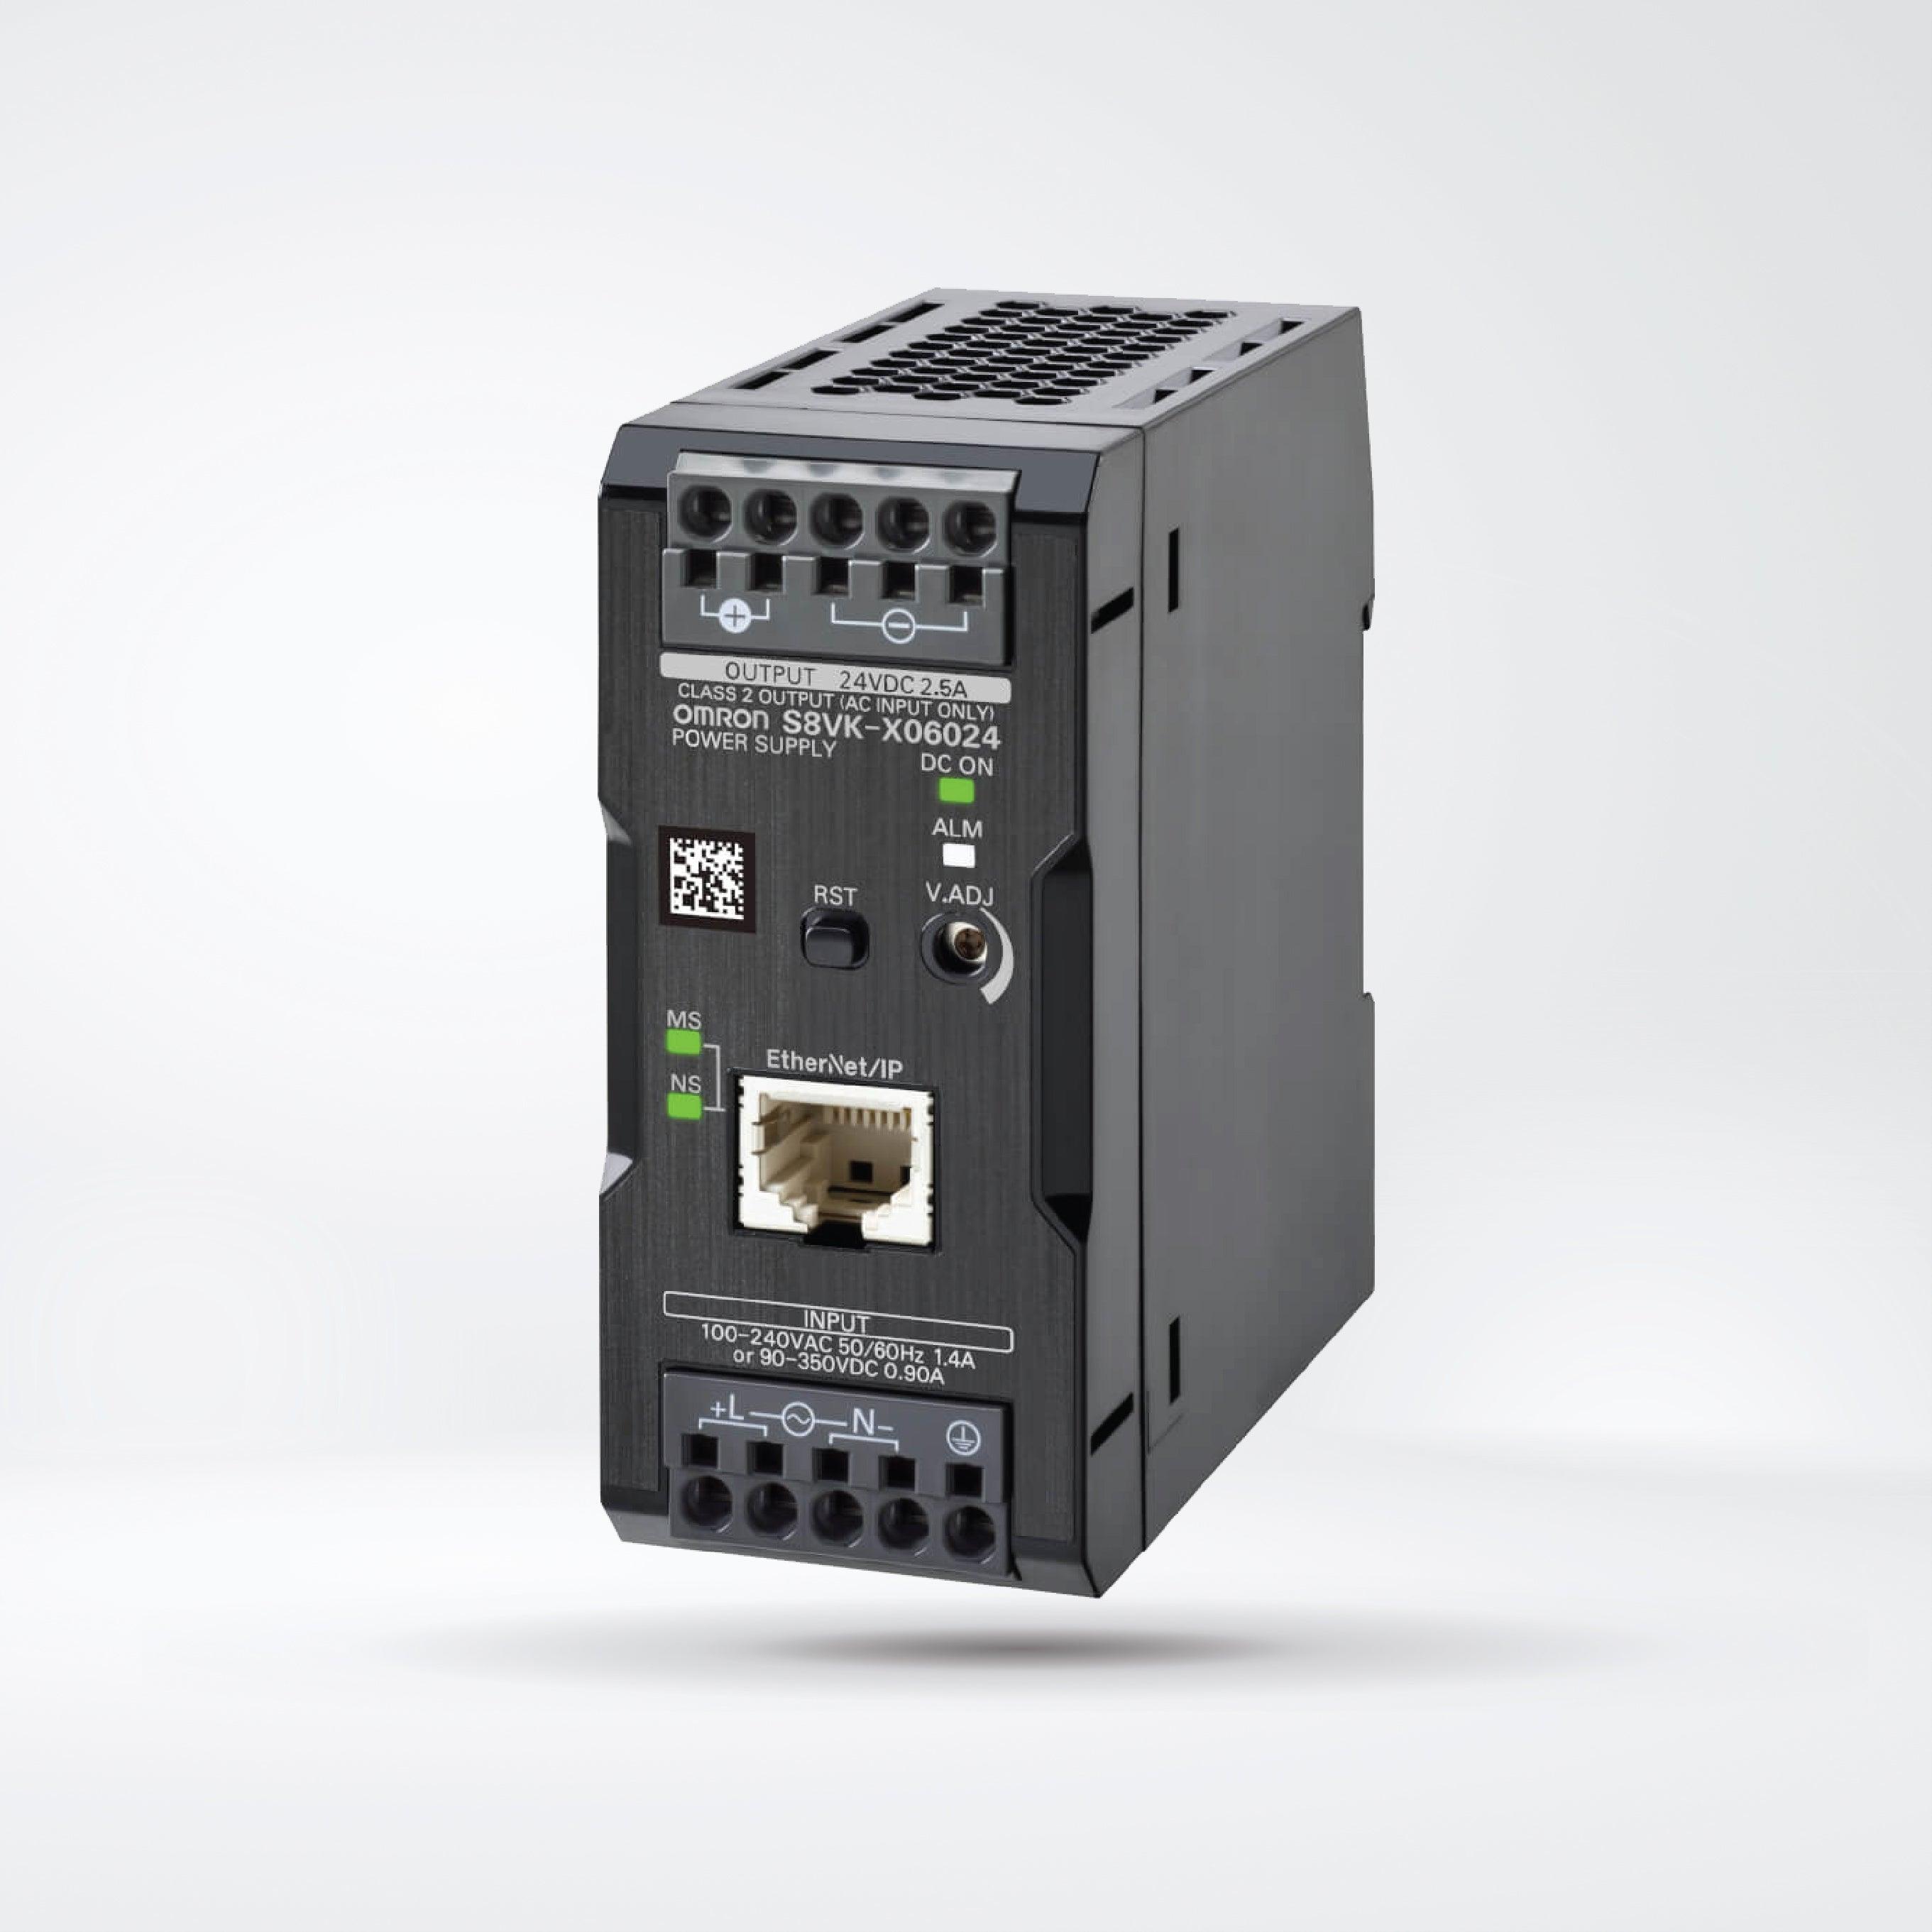 S8VK-X06024-EIP Switch Mode Power Supply, with EtherNet/IP, Modbus TCP,60 W, 24 VDC - Riverplus